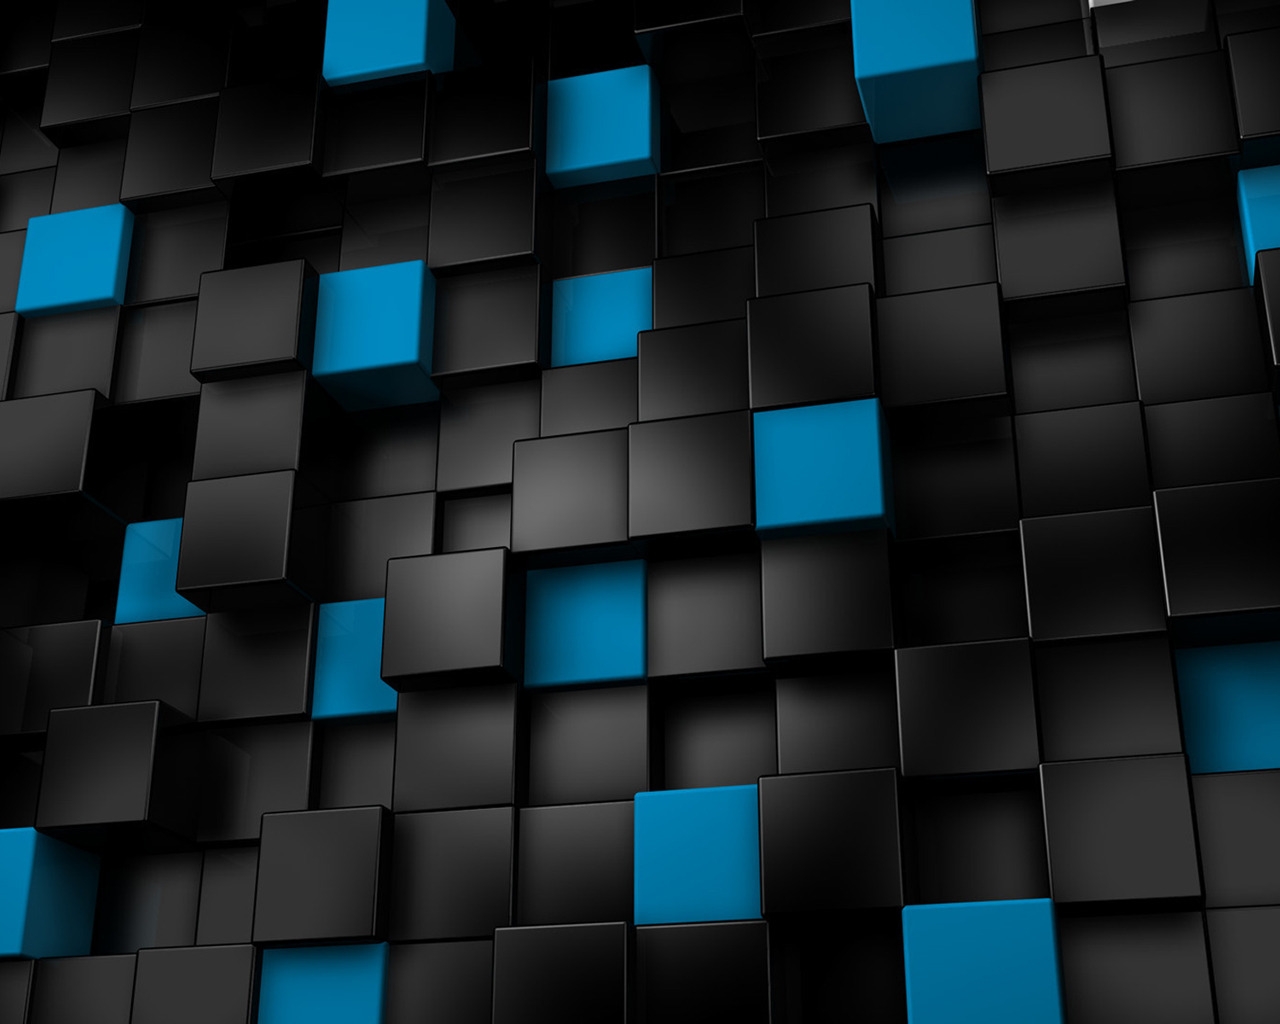 Black & Blue Cubes for 1280 x 1024 resolution